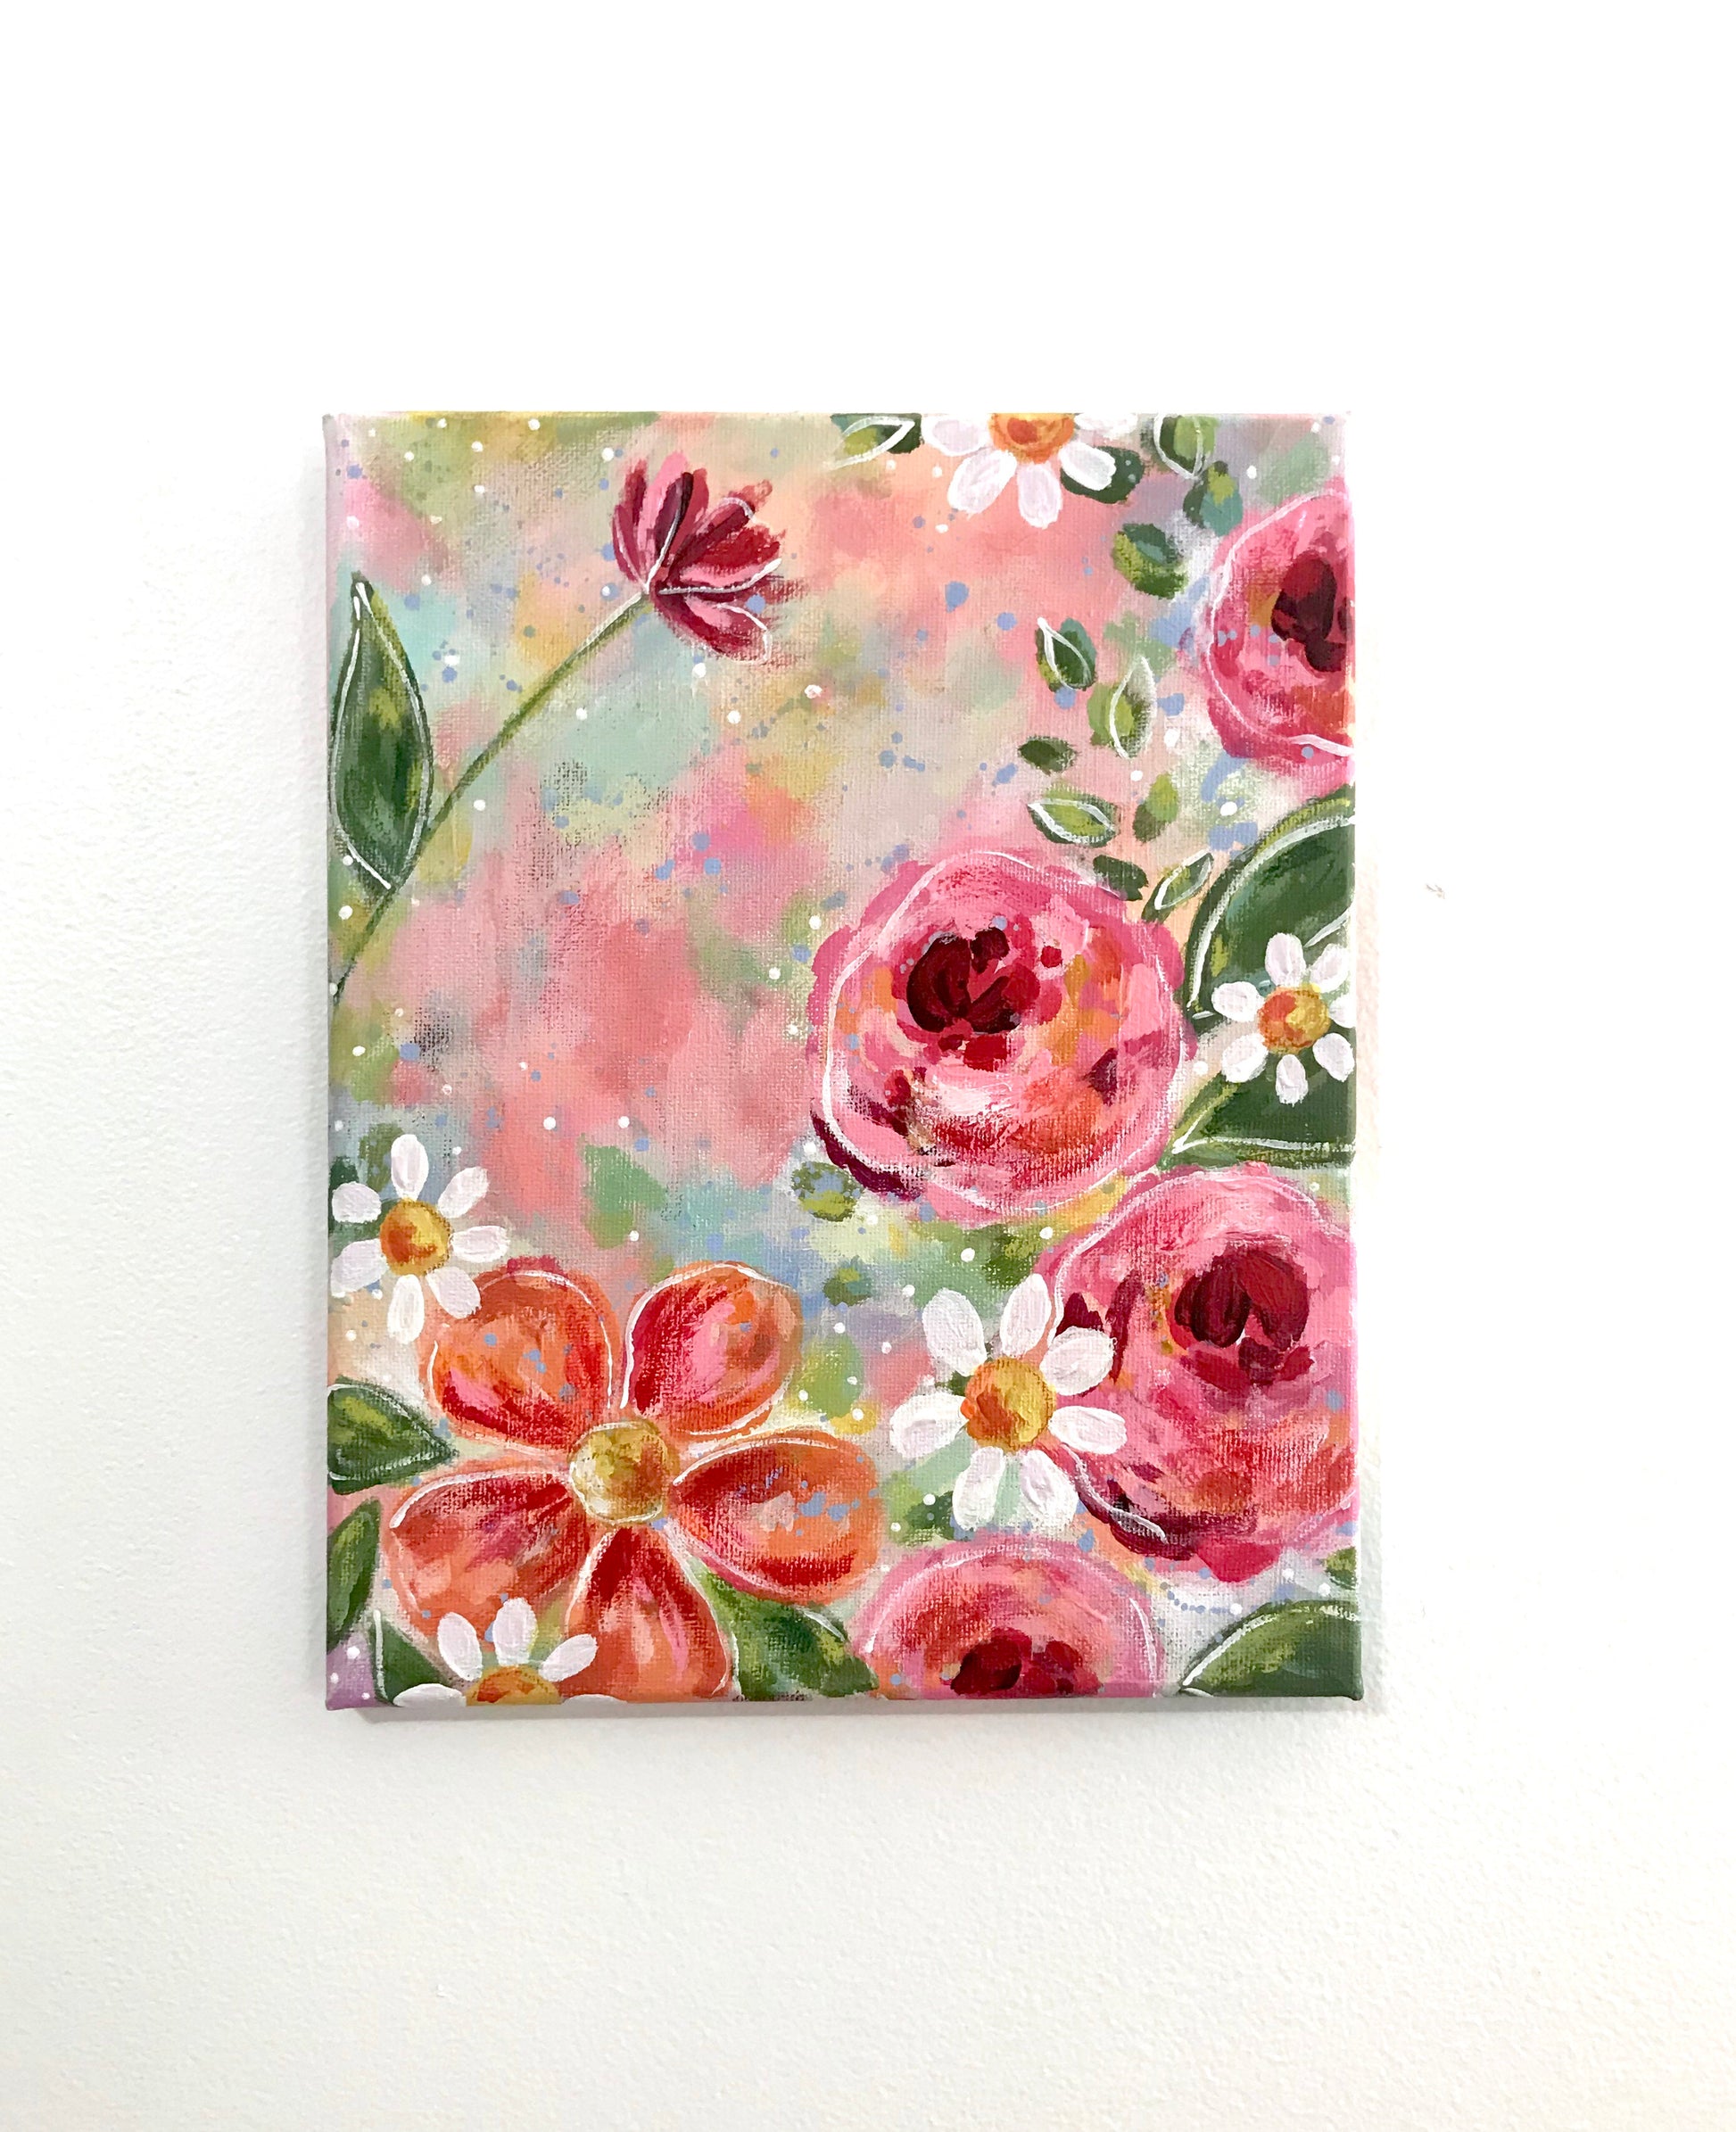 New Spring Floral Mixed Media Painting on 8x10 inch canvas - Bethany Joy Art